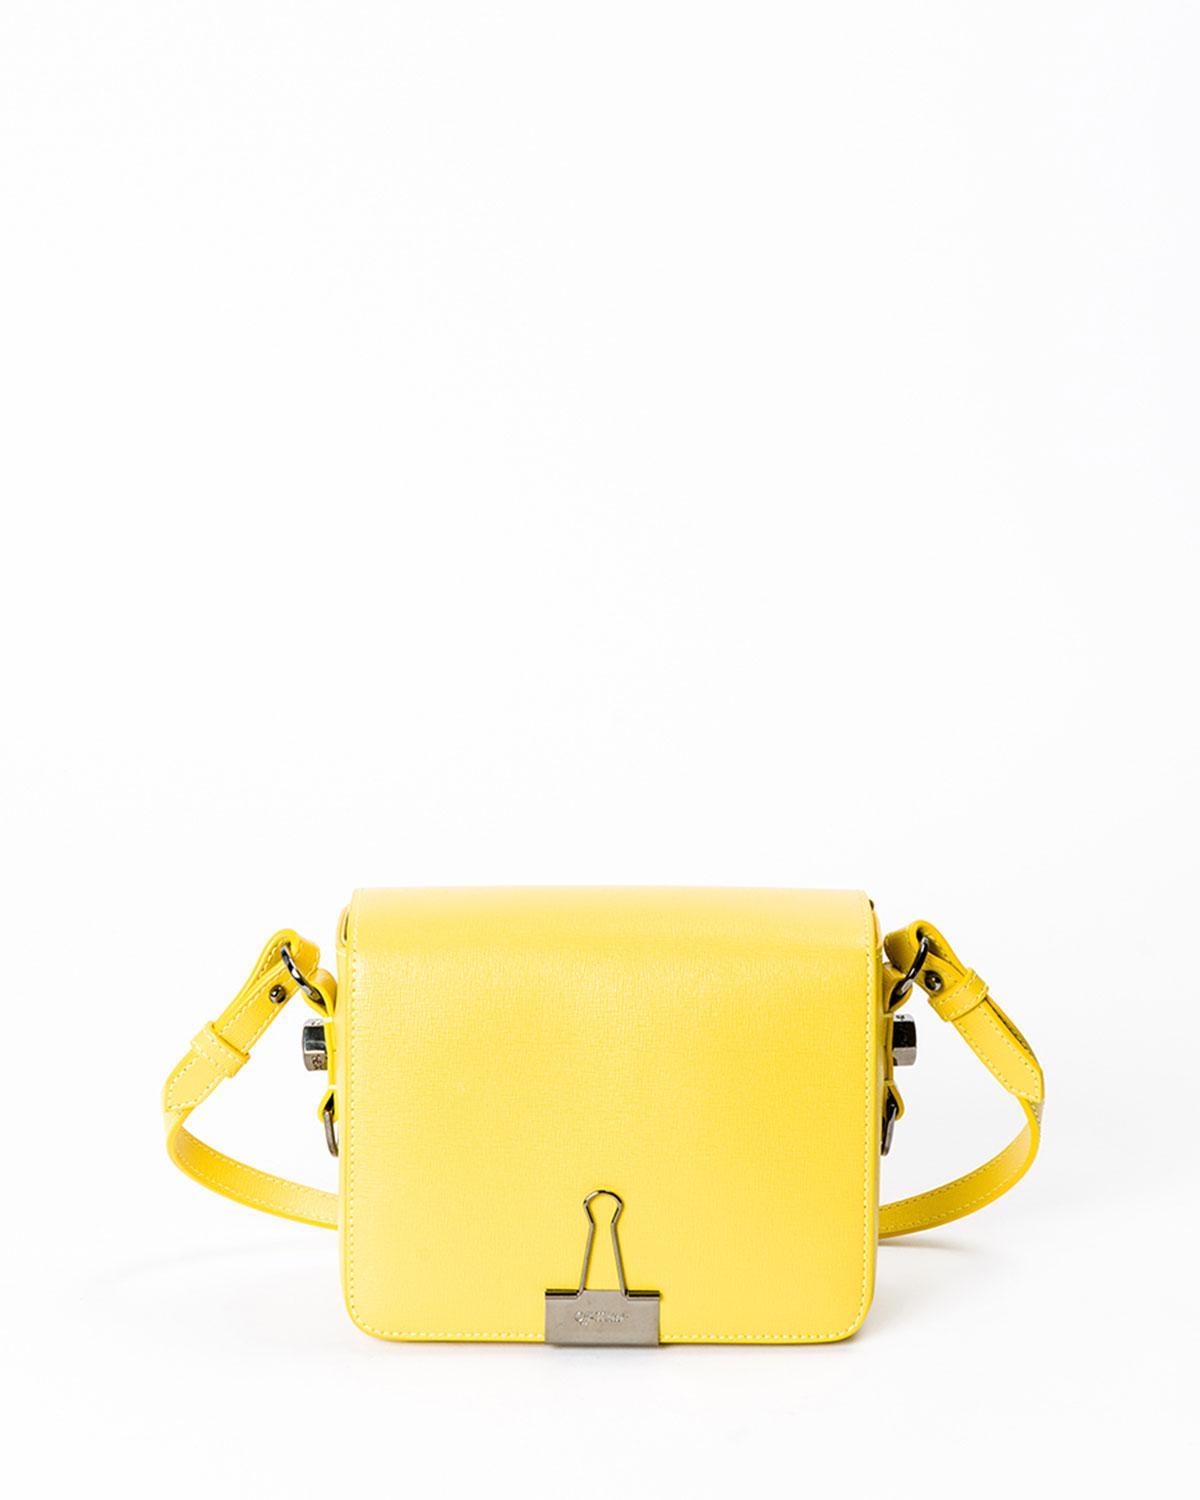 Off-White c/o Virgil Abloh Leather Flap Crossbody Bag With Binder-clip Detail in Yellow - Lyst